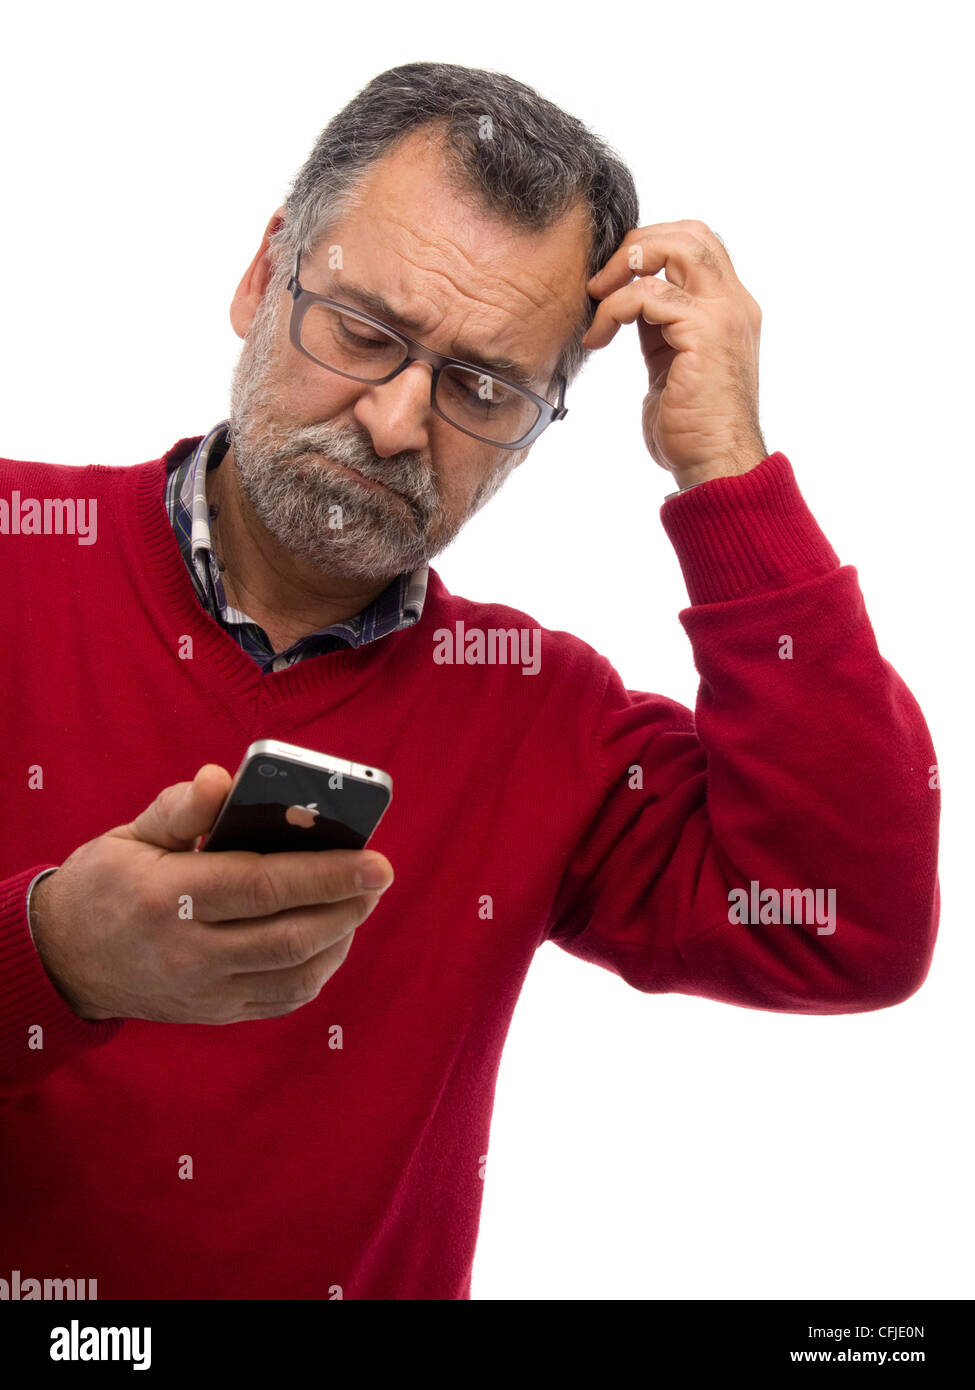 Confused mature man using iPhone Stock Photo